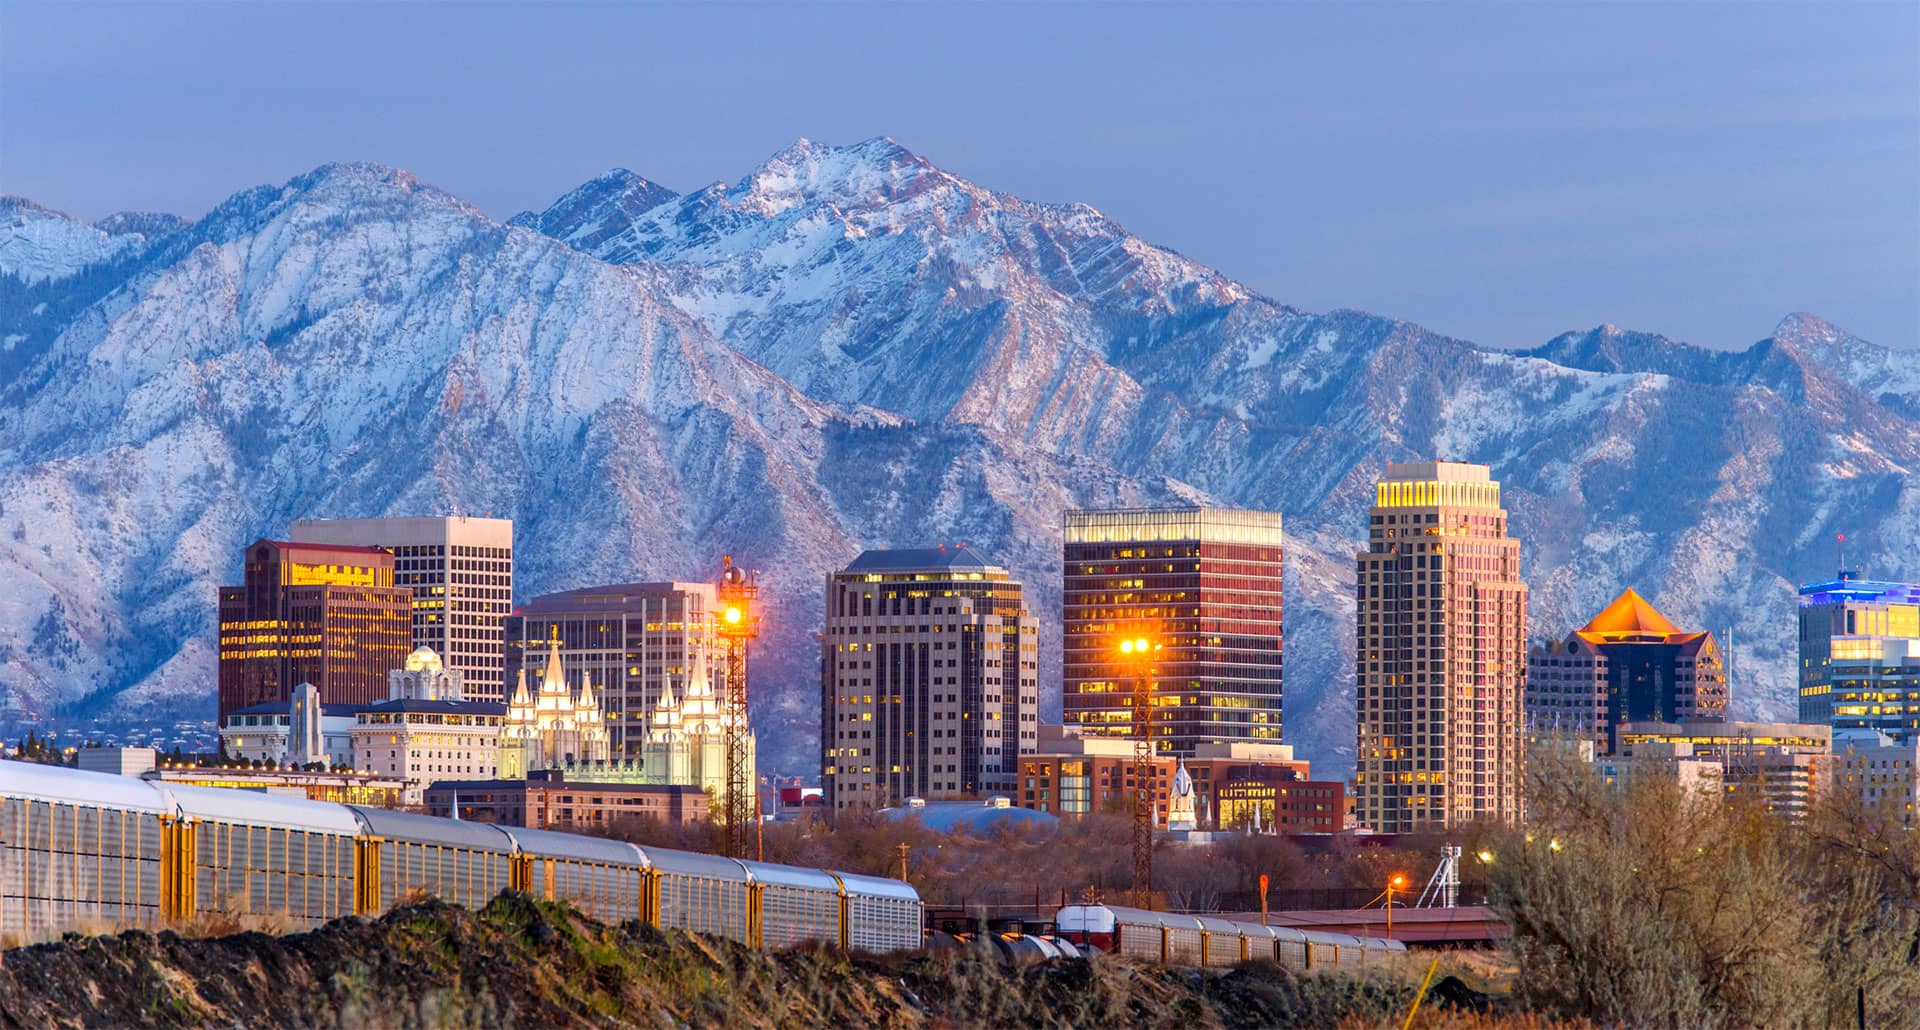 Aerial shot of the Salt Lake City, Utah skyline with mountains in background.